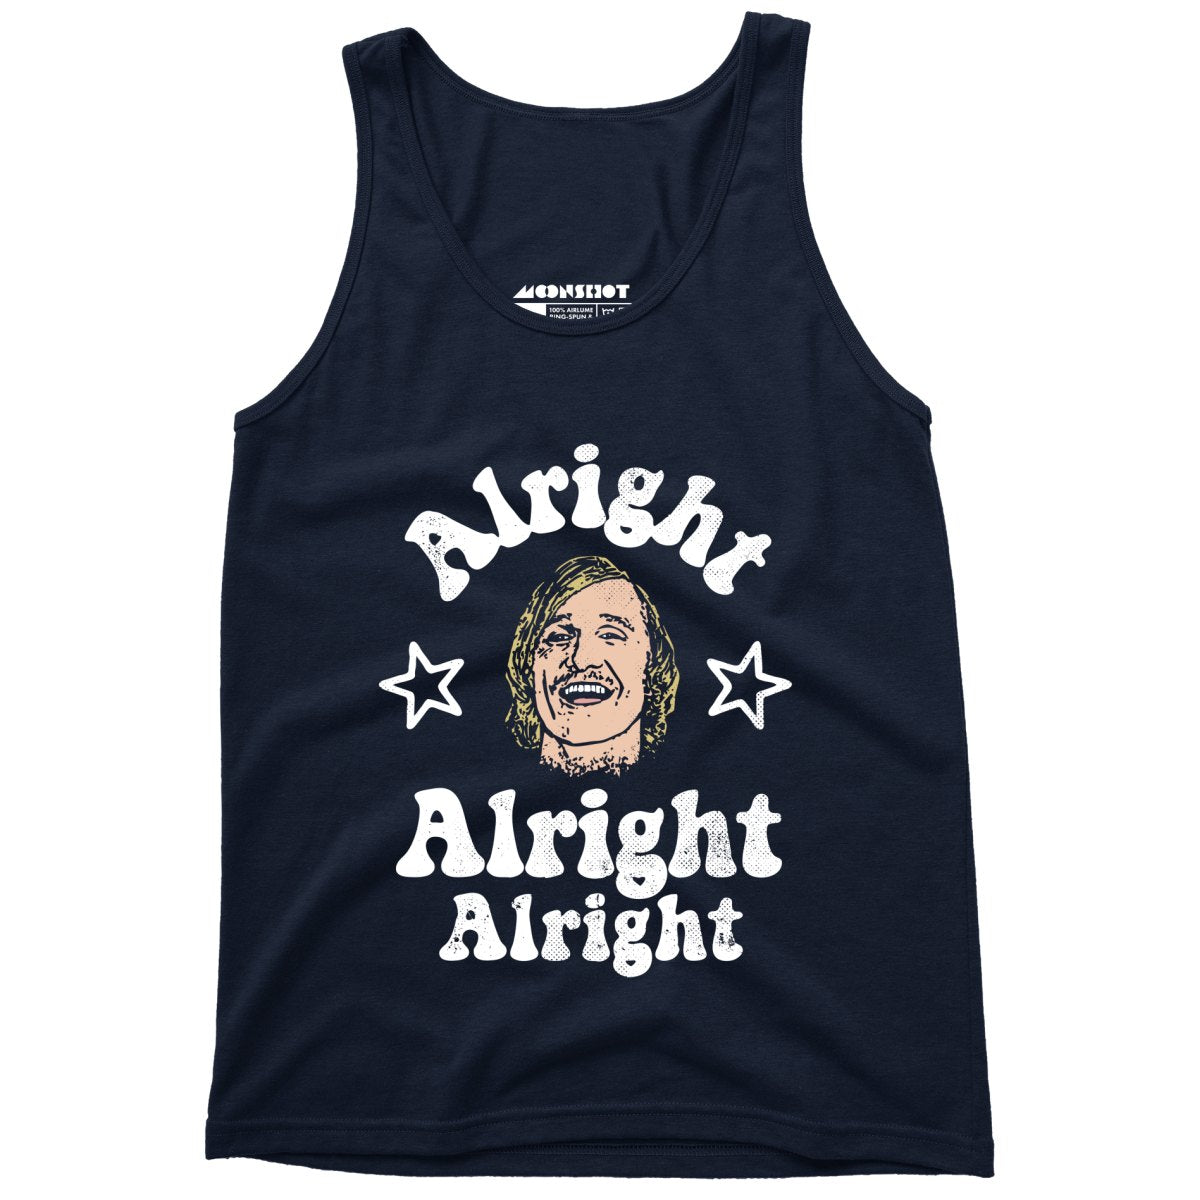 Alright Alright Alright Wooderson - Unisex Tank Top